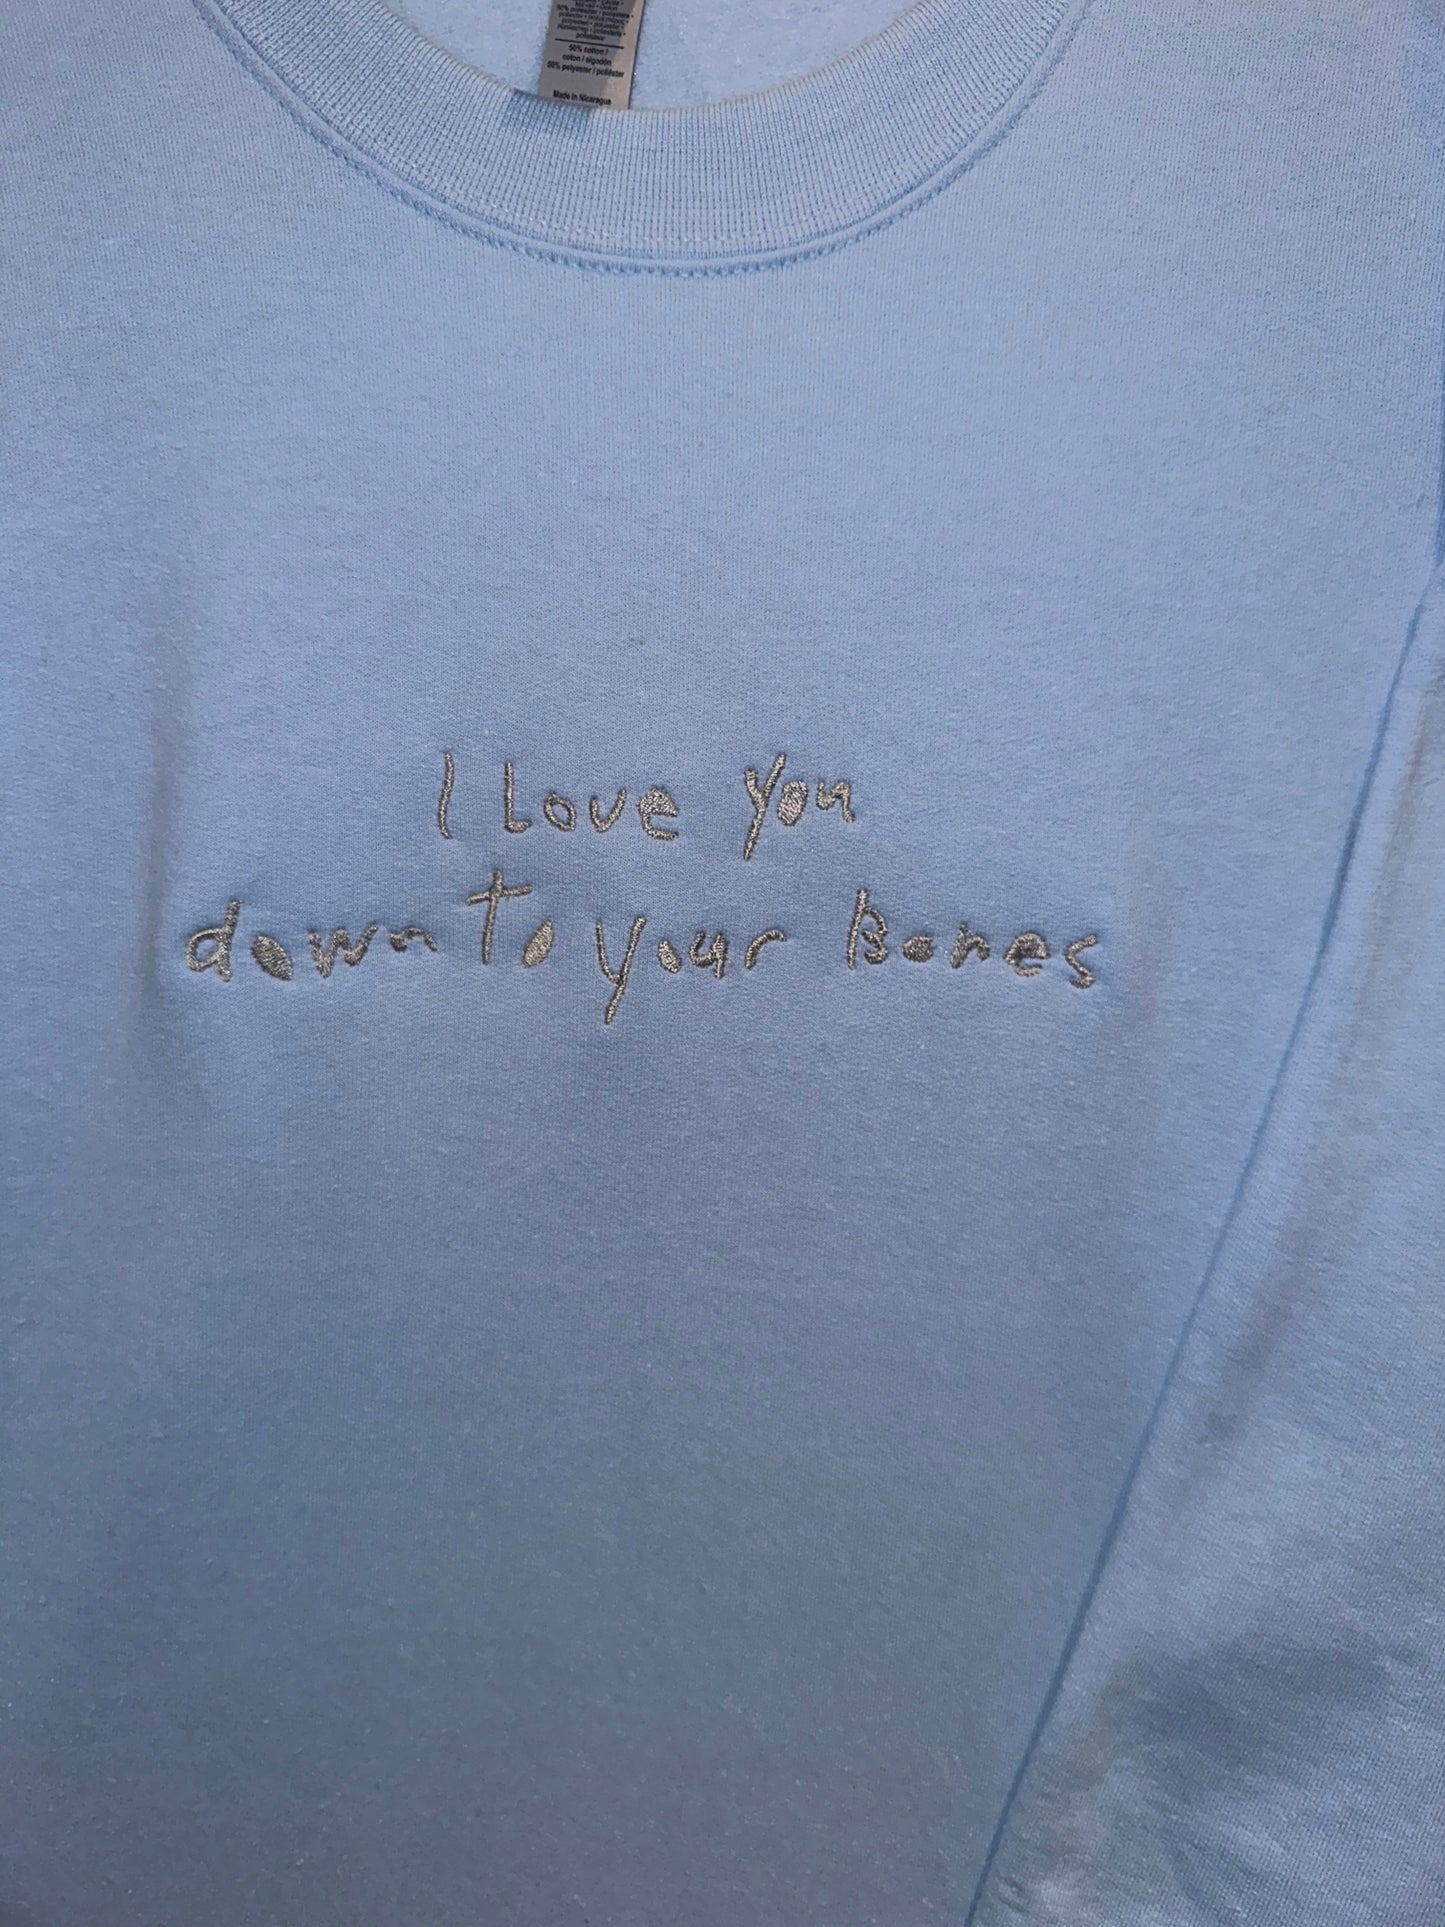 I Love You Down To Your Bones Crew Neck